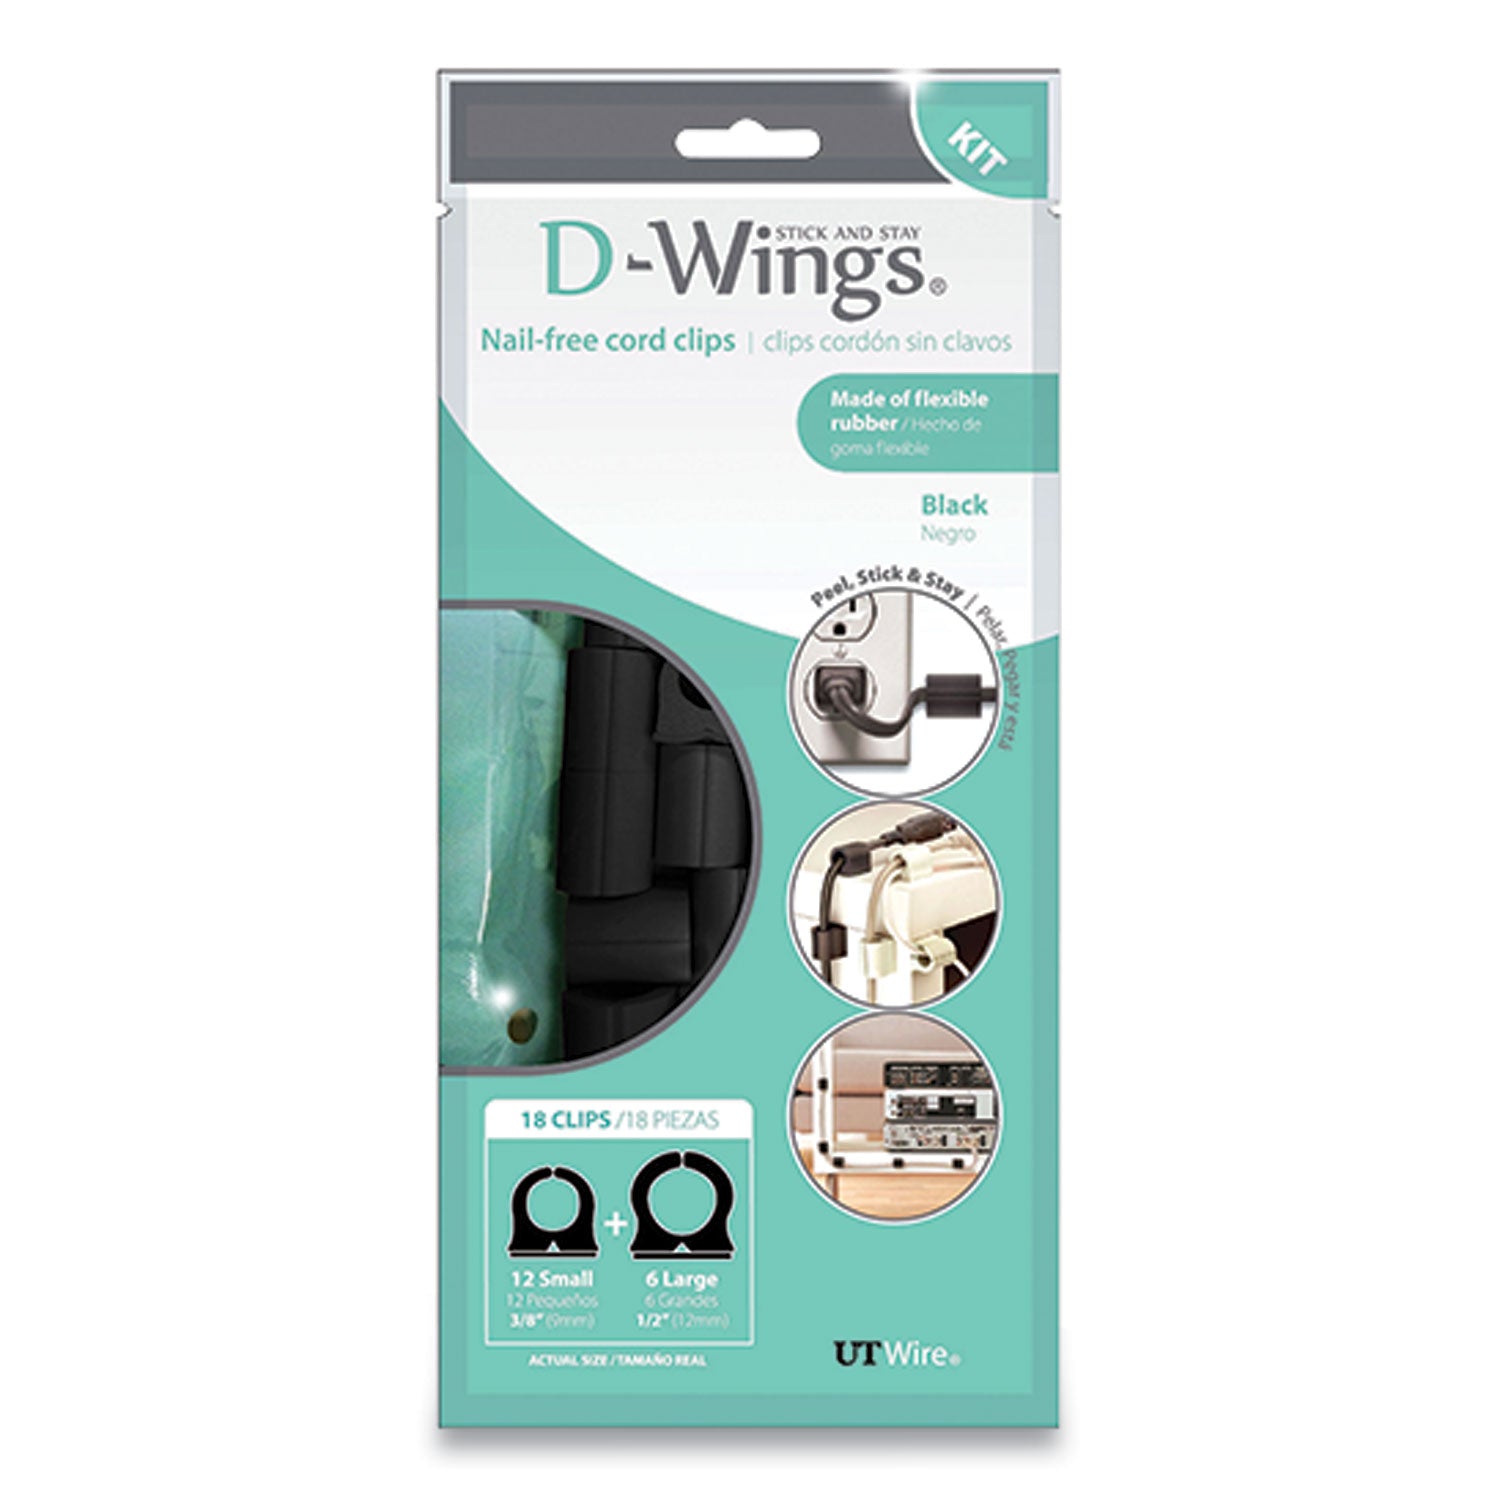 d-wings-nail-free-cord-clips-12-small-038-six-large-05-black-18-pack_rboutwd18bk - 1